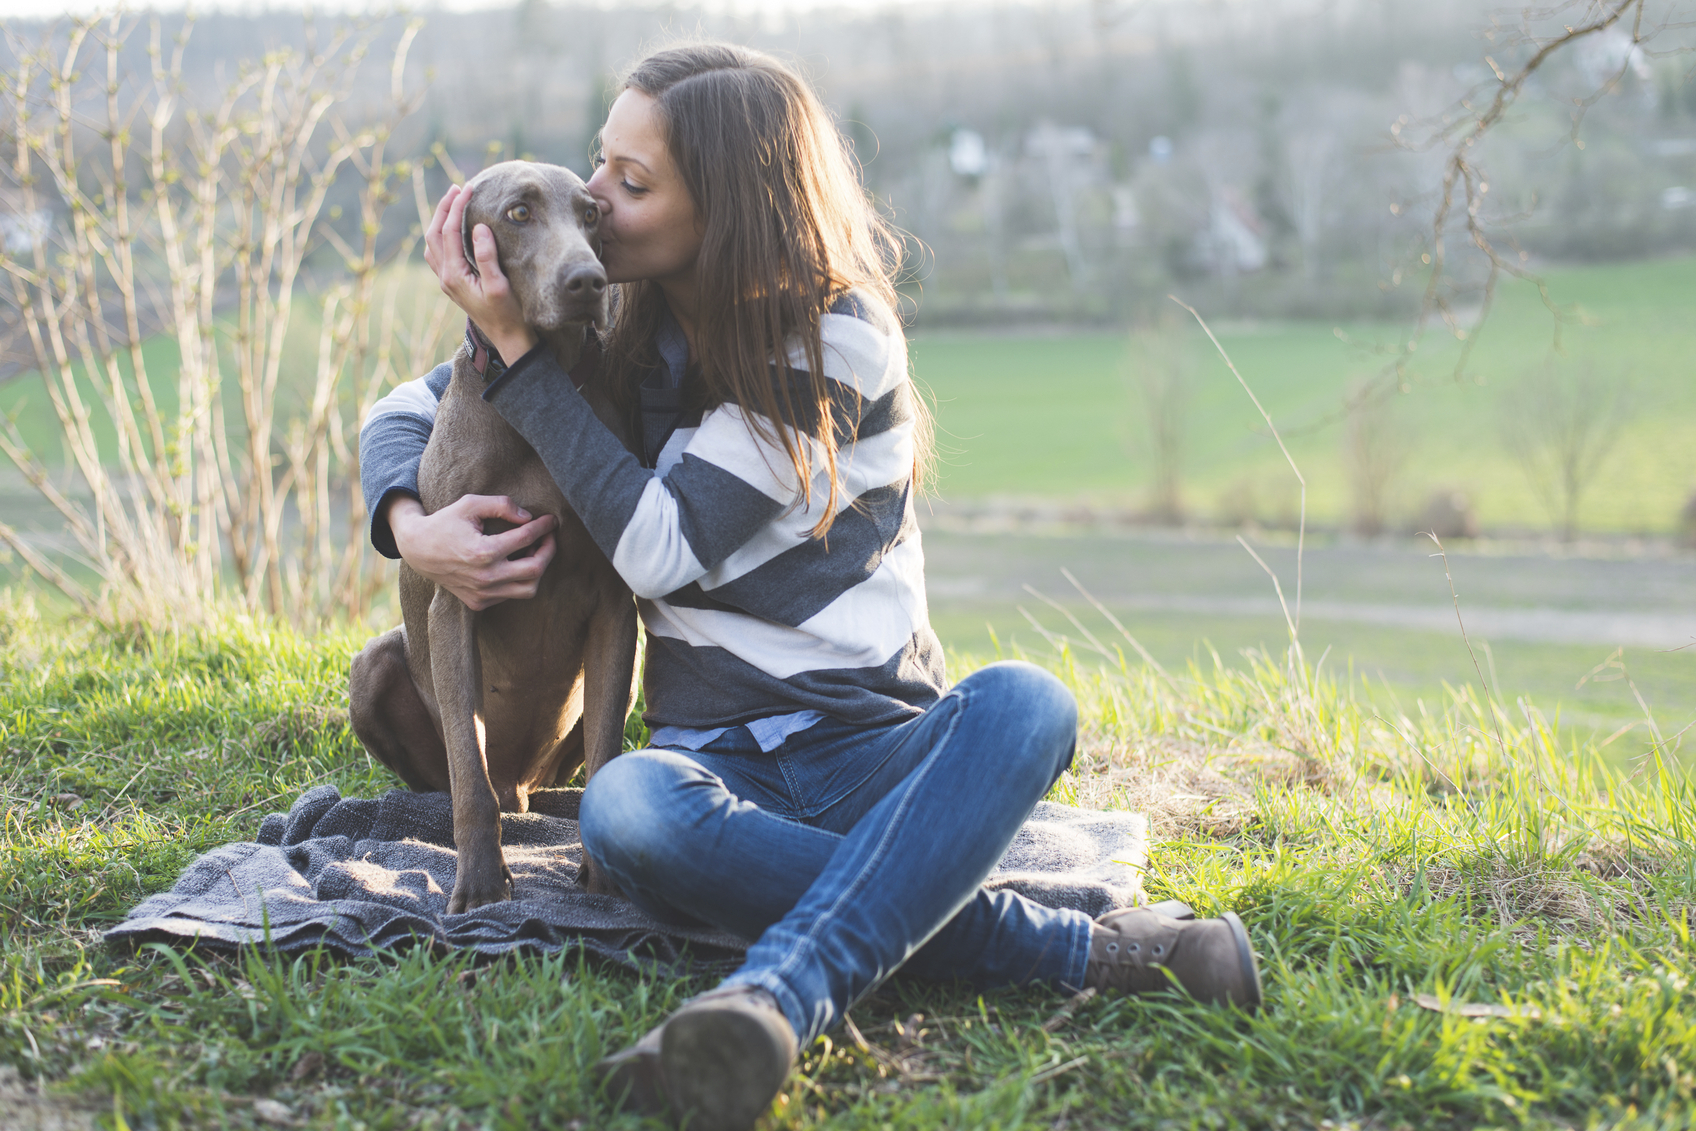 woman in sunlit field hugging her dog and giving it a kiss on the head